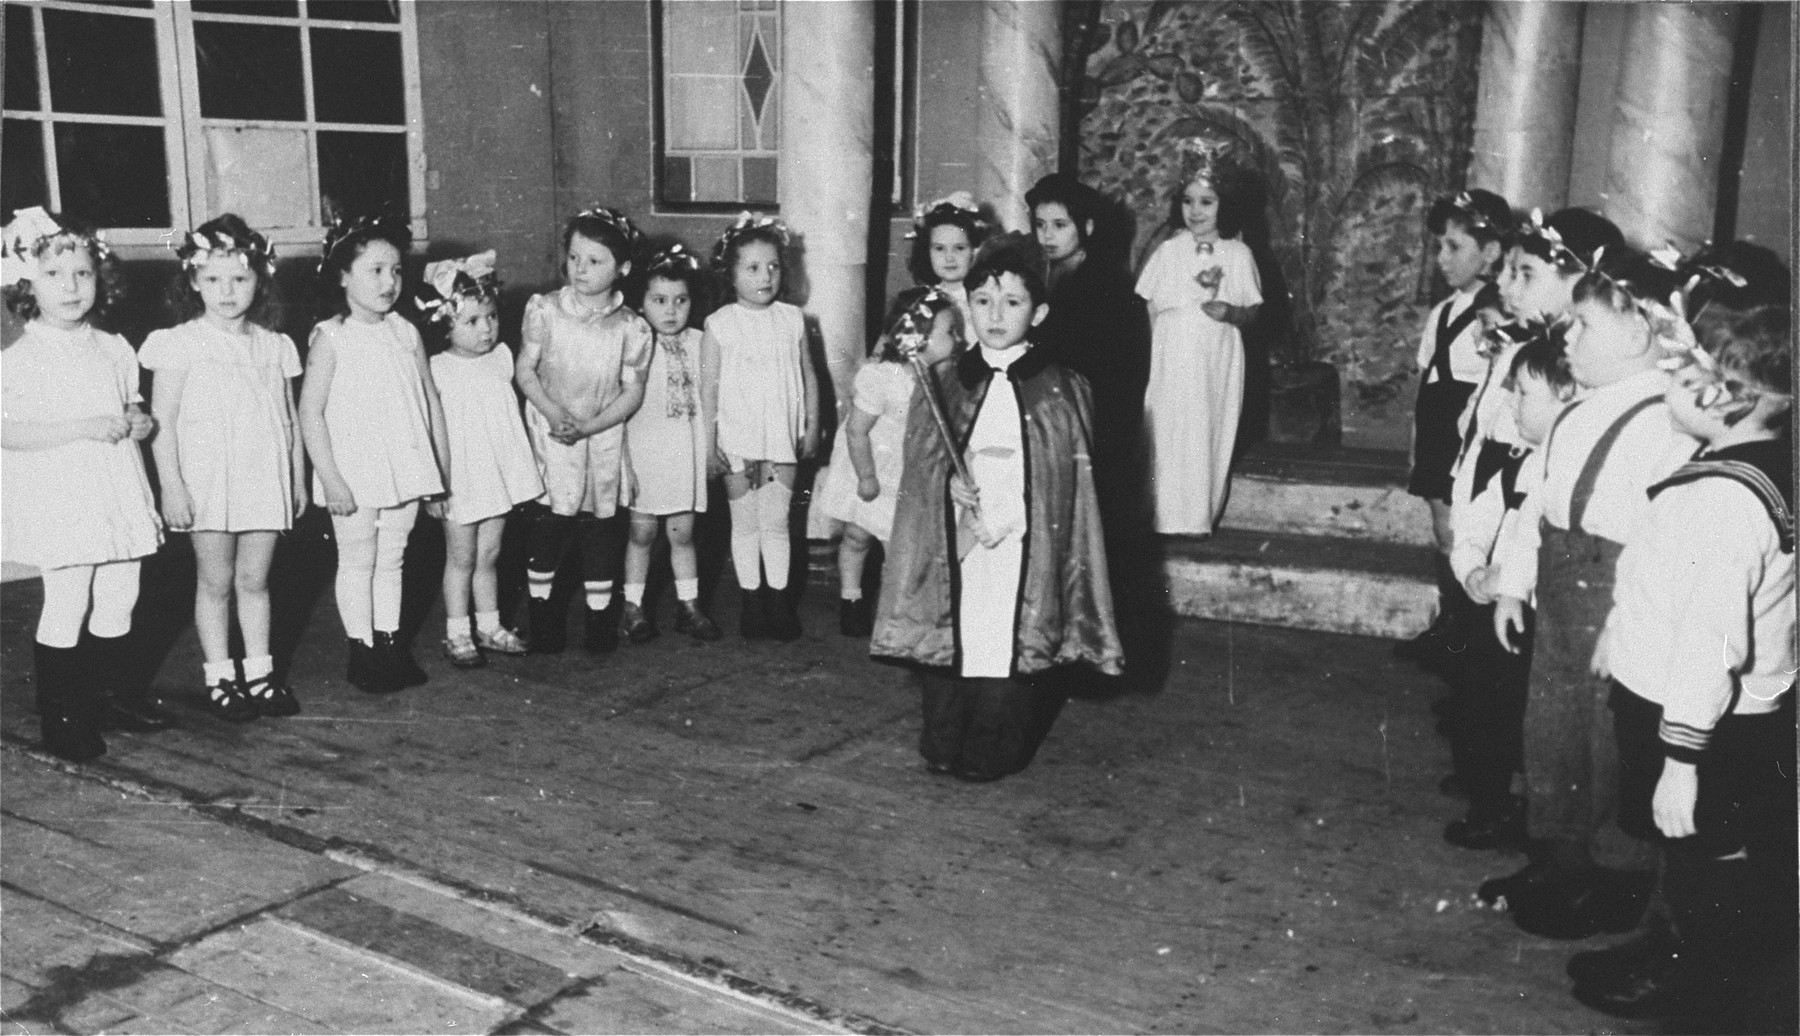 Young children perform in a Purim show in the Zeilsheim displaced person's camp. 

Fay Robinson (later Shlimovitz) on the far left, is the daughter of the photographer. She was born July 22, 1941 in Novaya Odessa, Ukraine. She went to Zeilsheim in 1945 and later emigrated to the United States in 1948.